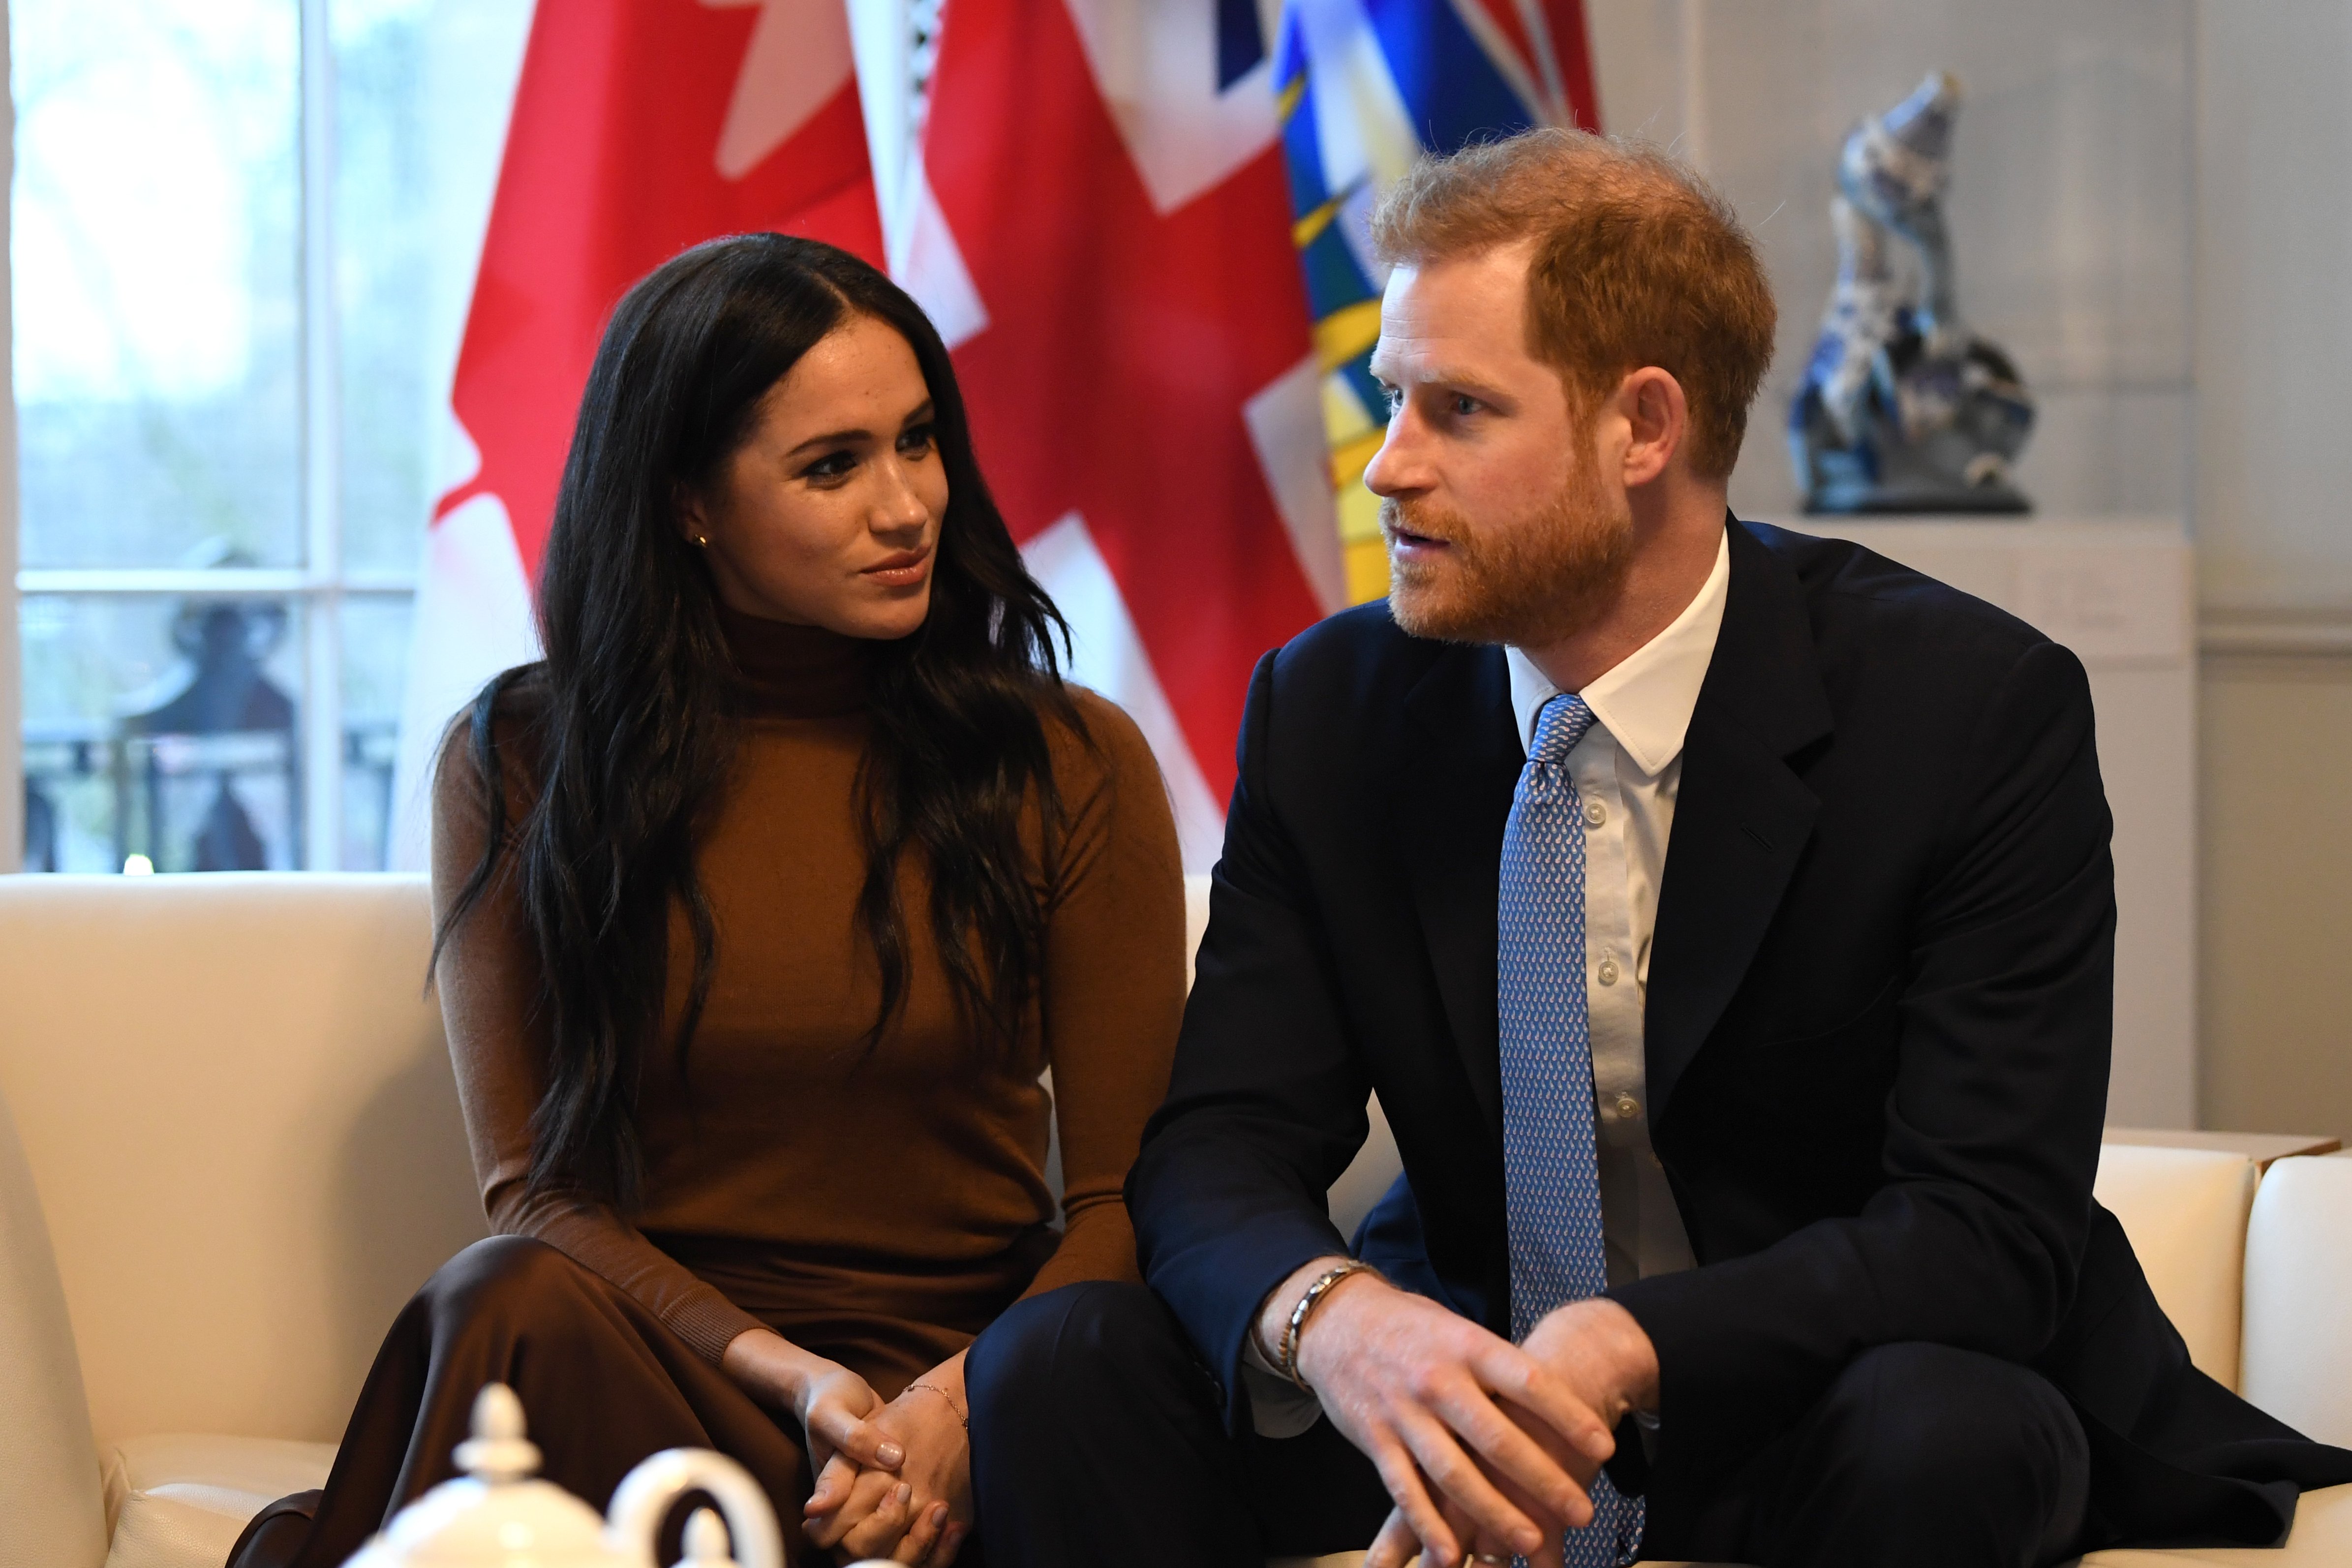 Prince Harry, Duke of Sussex and Meghan, Duchess of Sussex gesture during their visit to Canada House on January 7, 2020. | Source: Getty Images